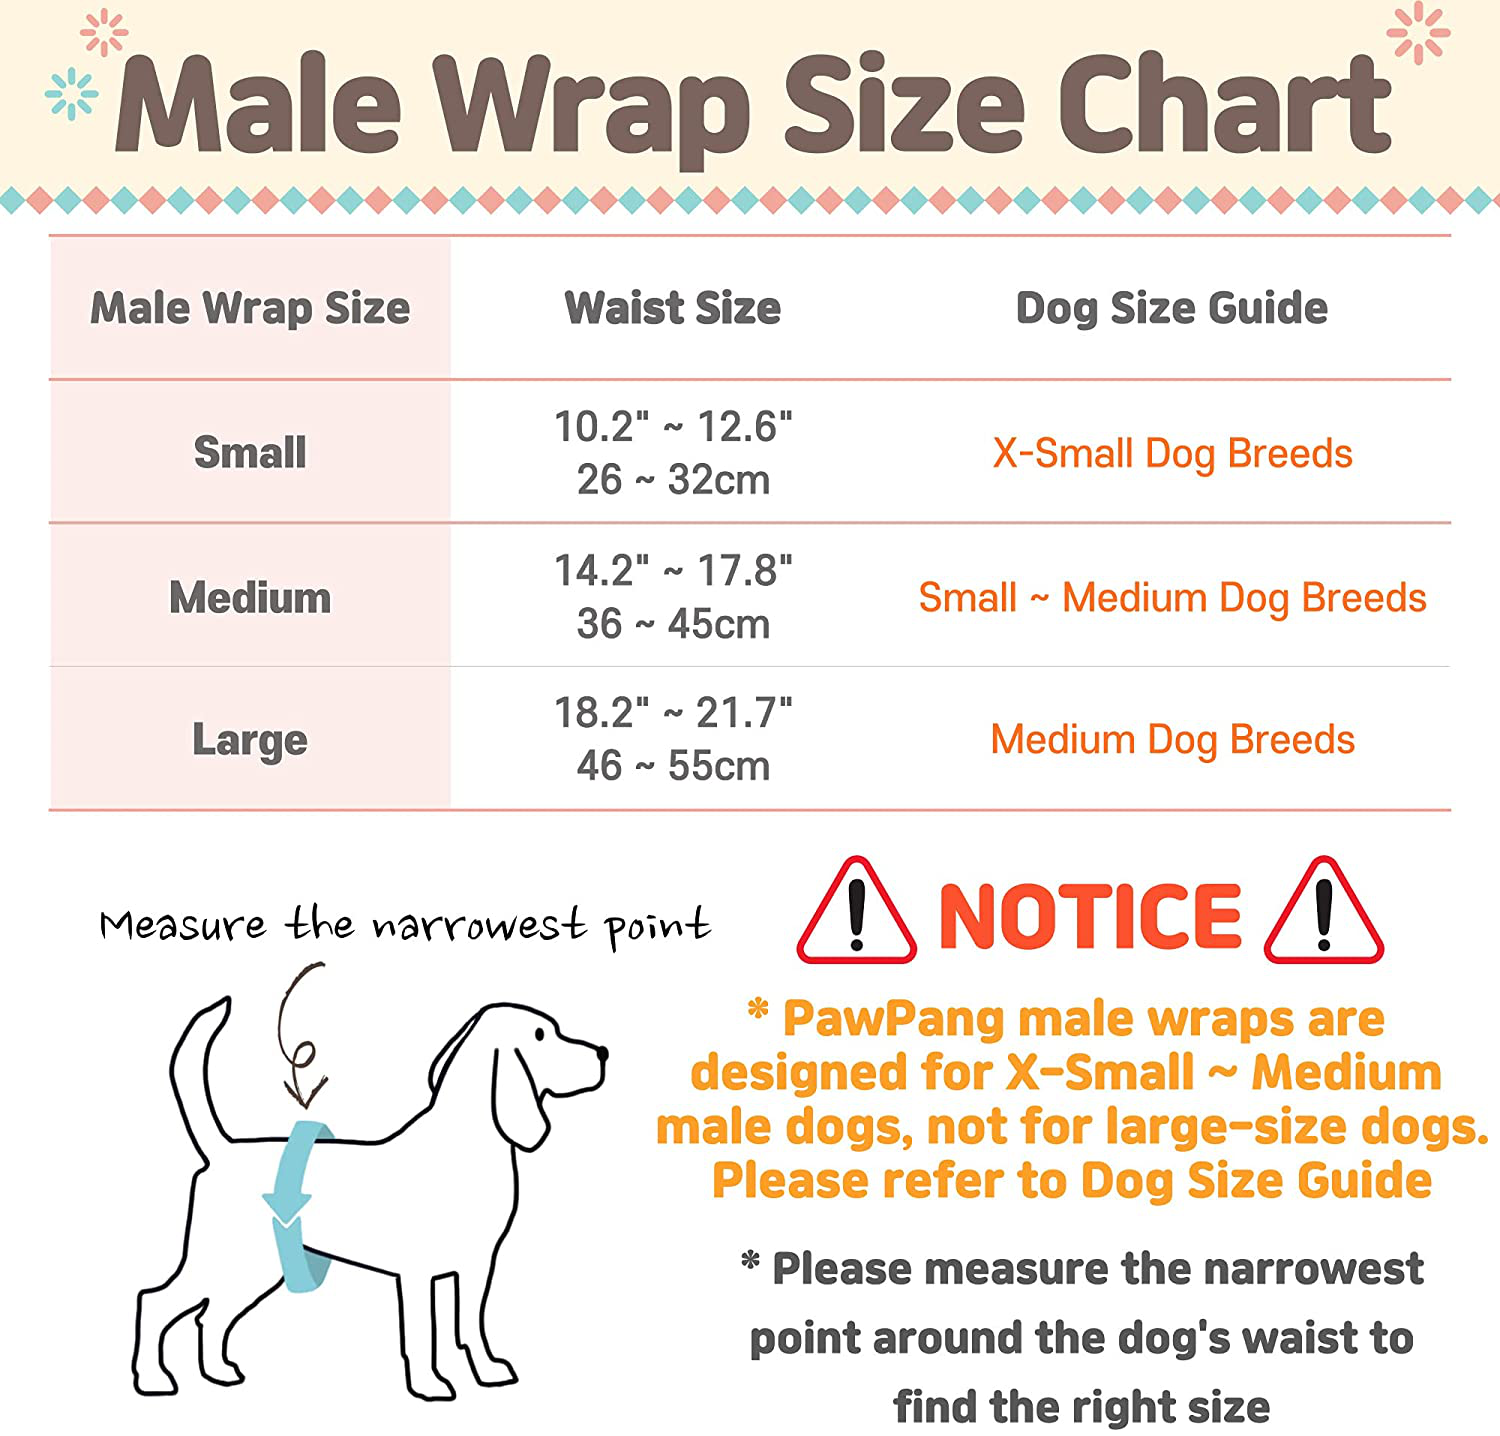 PAWPANG Reusable Air Mesh Male Dog Wrap (1 Pack) with Disposable Dog Diaper Liners Booster Pads (10Ct) | Washable Puppy Nappies Wrap | Pet Belly Band Animals & Pet Supplies > Pet Supplies > Dog Supplies > Dog Diaper Pads & Liners PAWPANG   